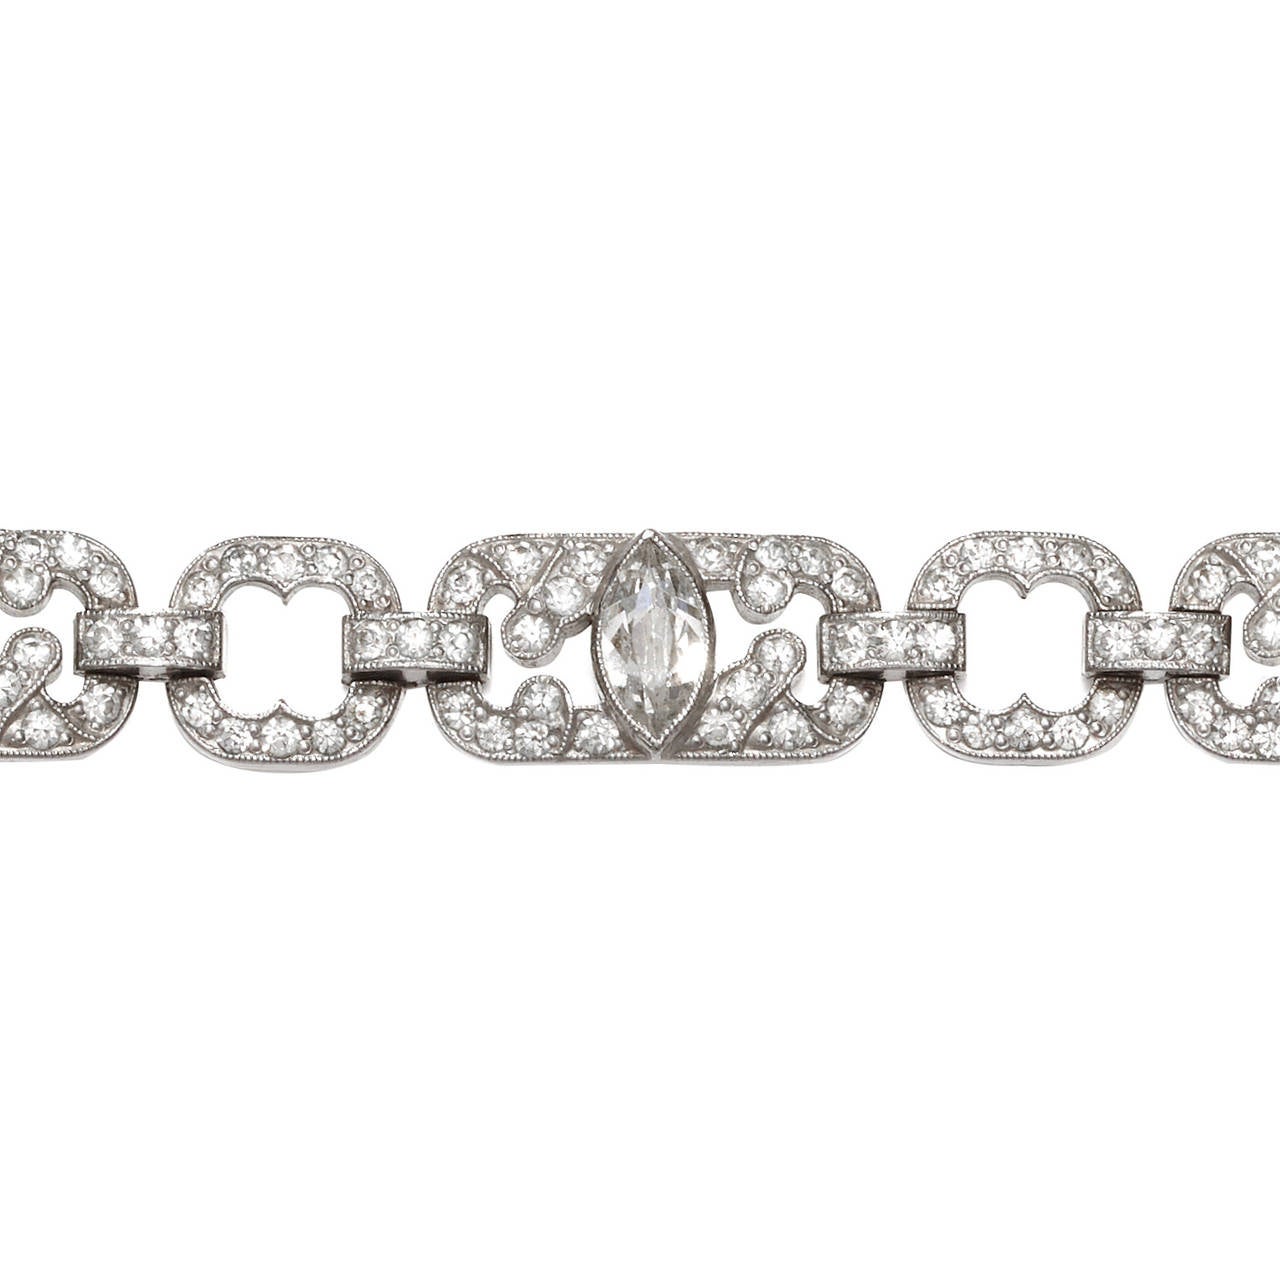 Delicate and exquisite Art Deco Rhodium plated bracelet by Engel Brothers, set with crystal rhinestones.

The openwork design is made up of 10 articulated pave set panels.

The bracelet measures 18cm long and 1cm wide.

Marked: E.B.